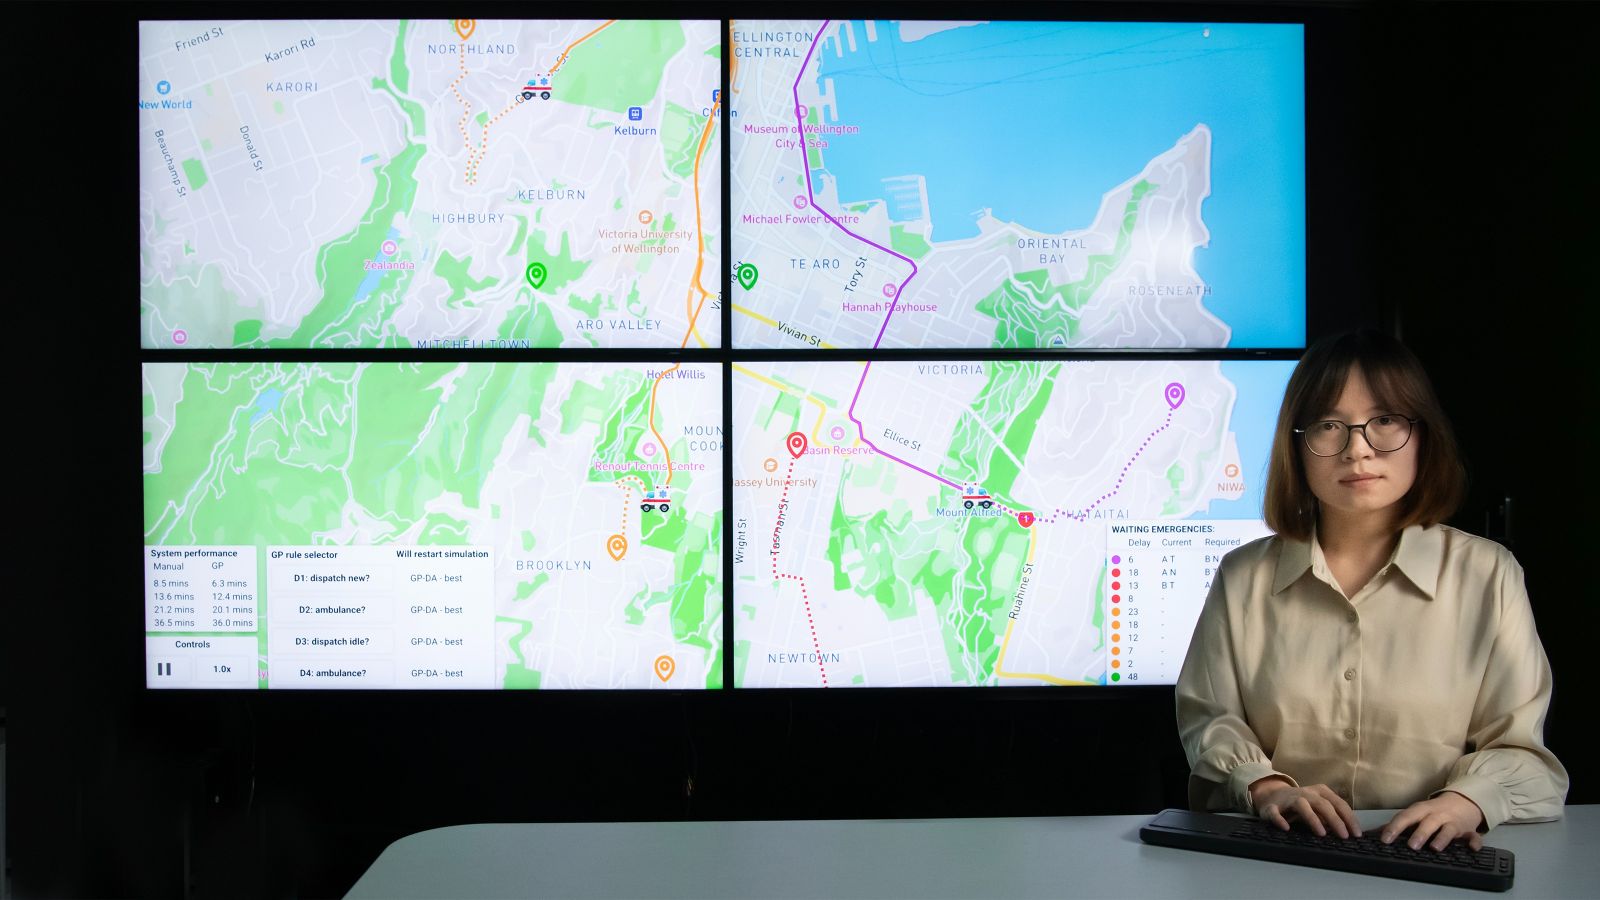 Woman in front of multi-screen display of town map